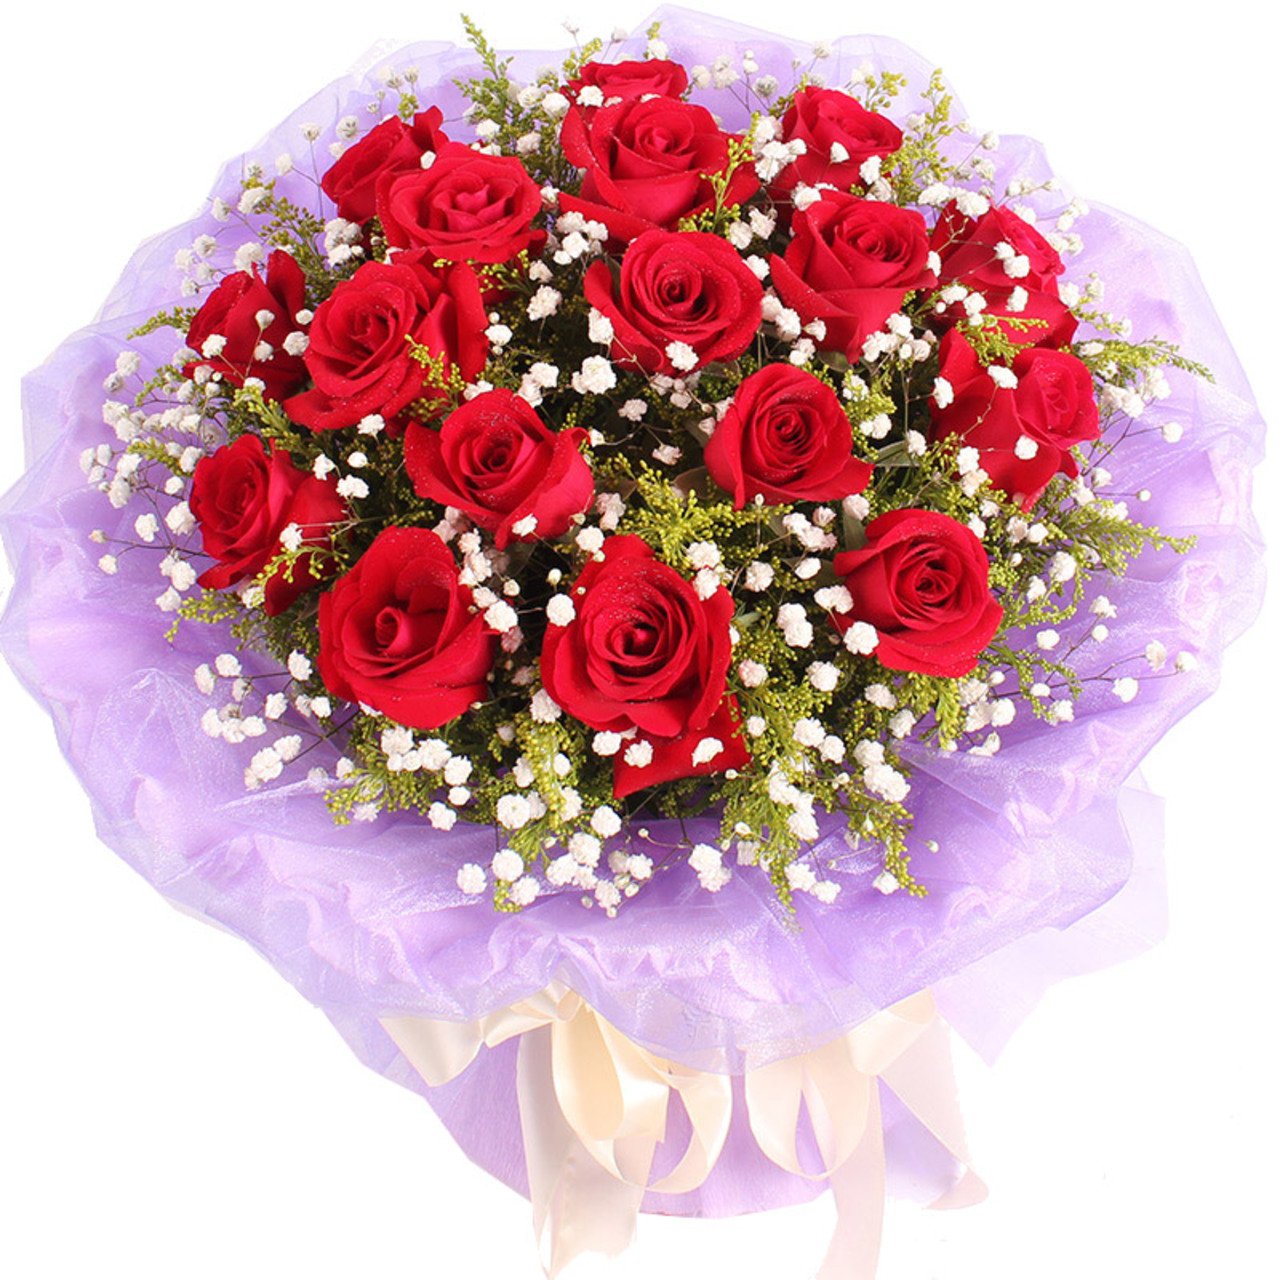 Confession of Love(
A selection of 19 top red roses)